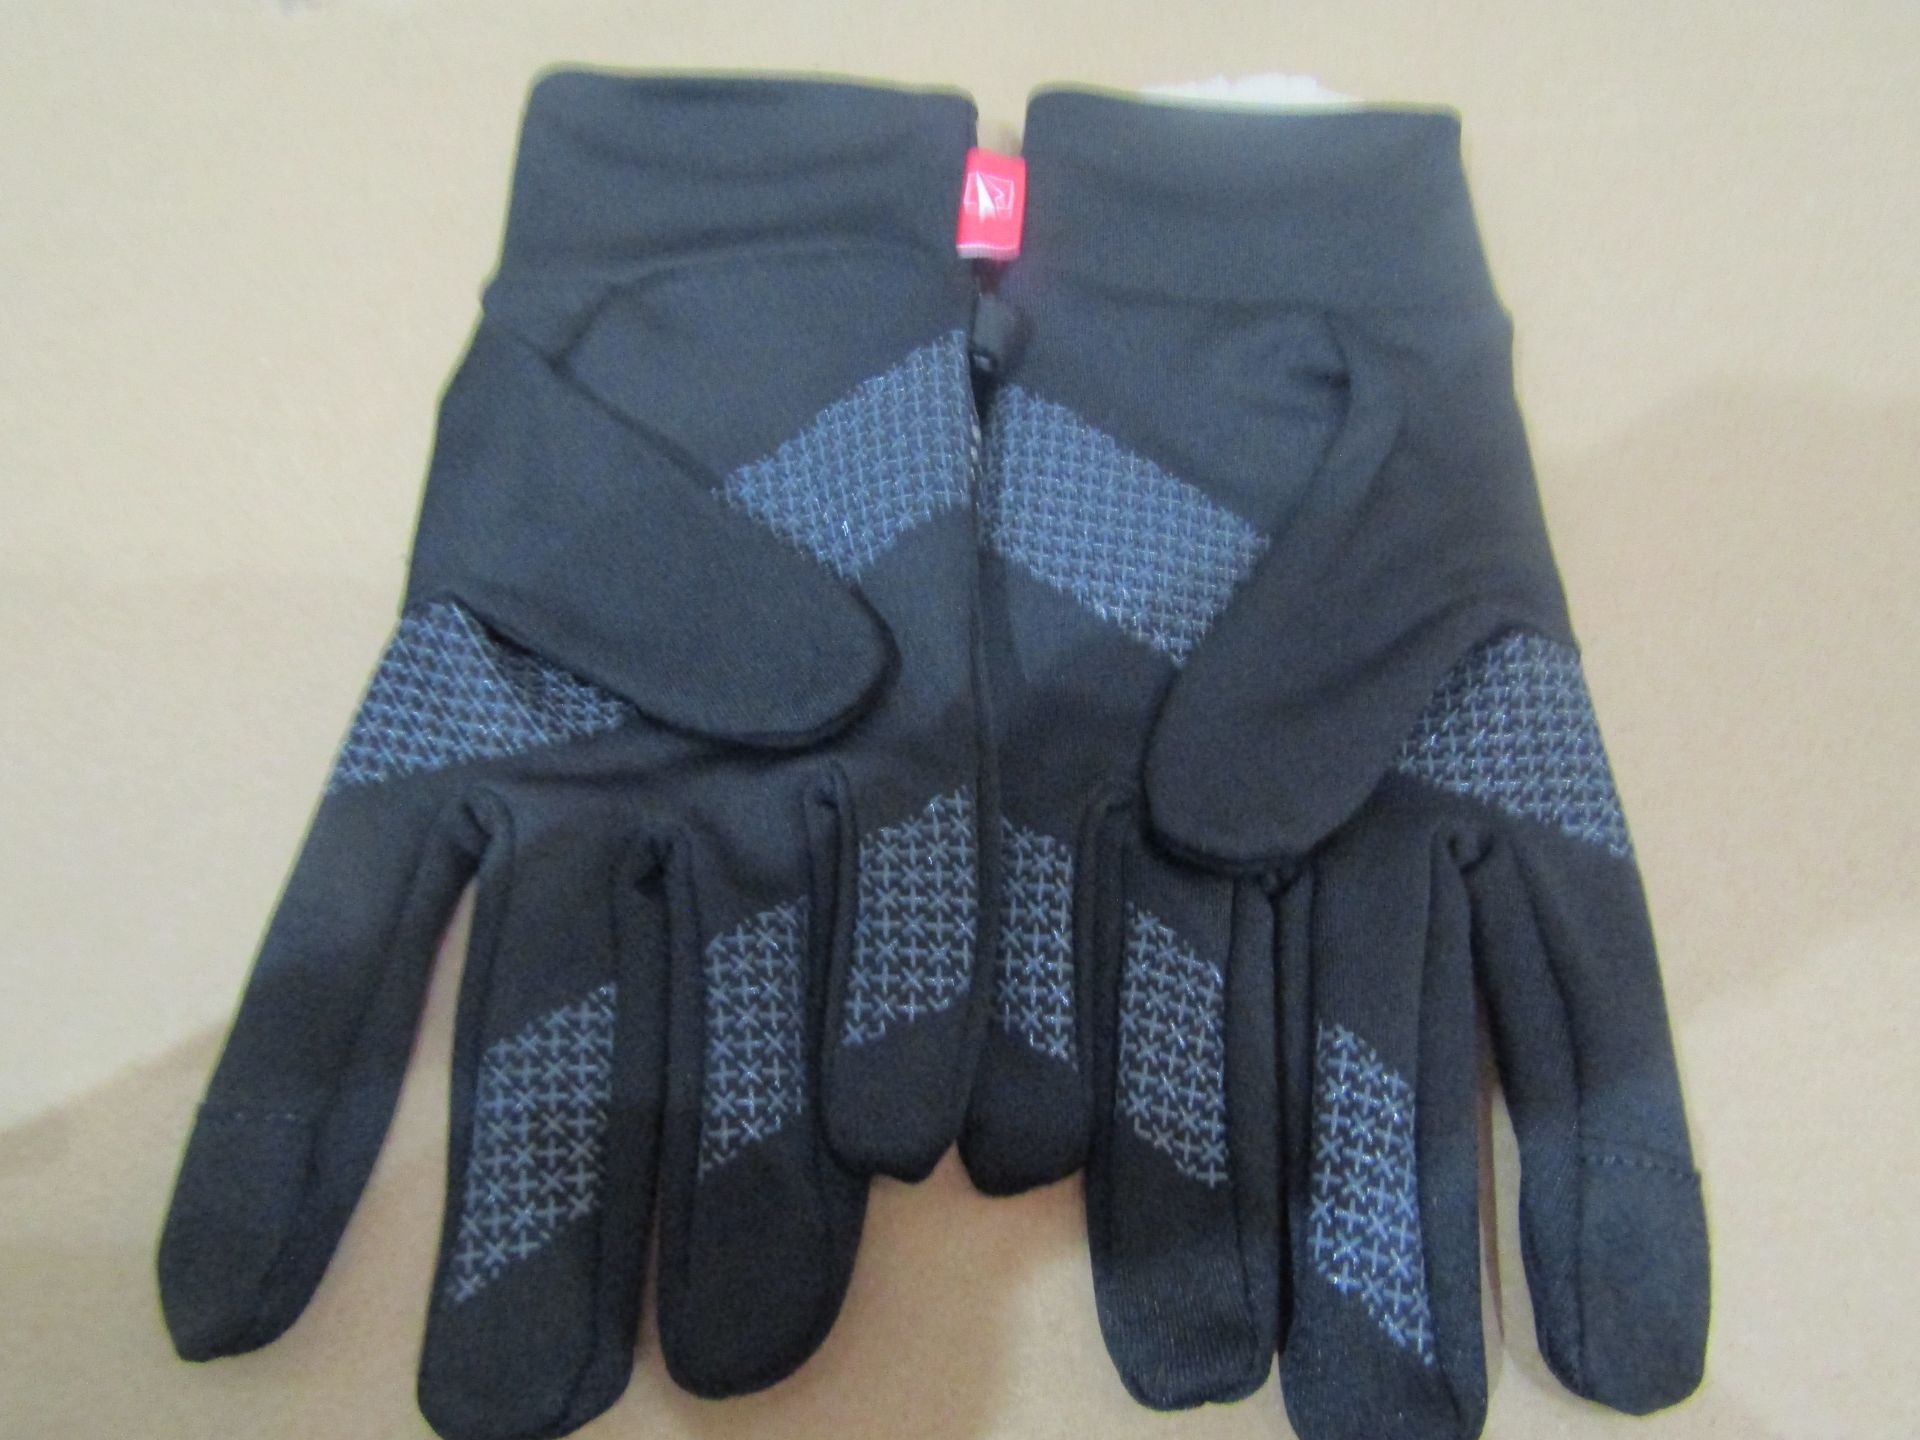 5 X Pairs of Unisex Sport/Winter Gloves Size M new & Packaged